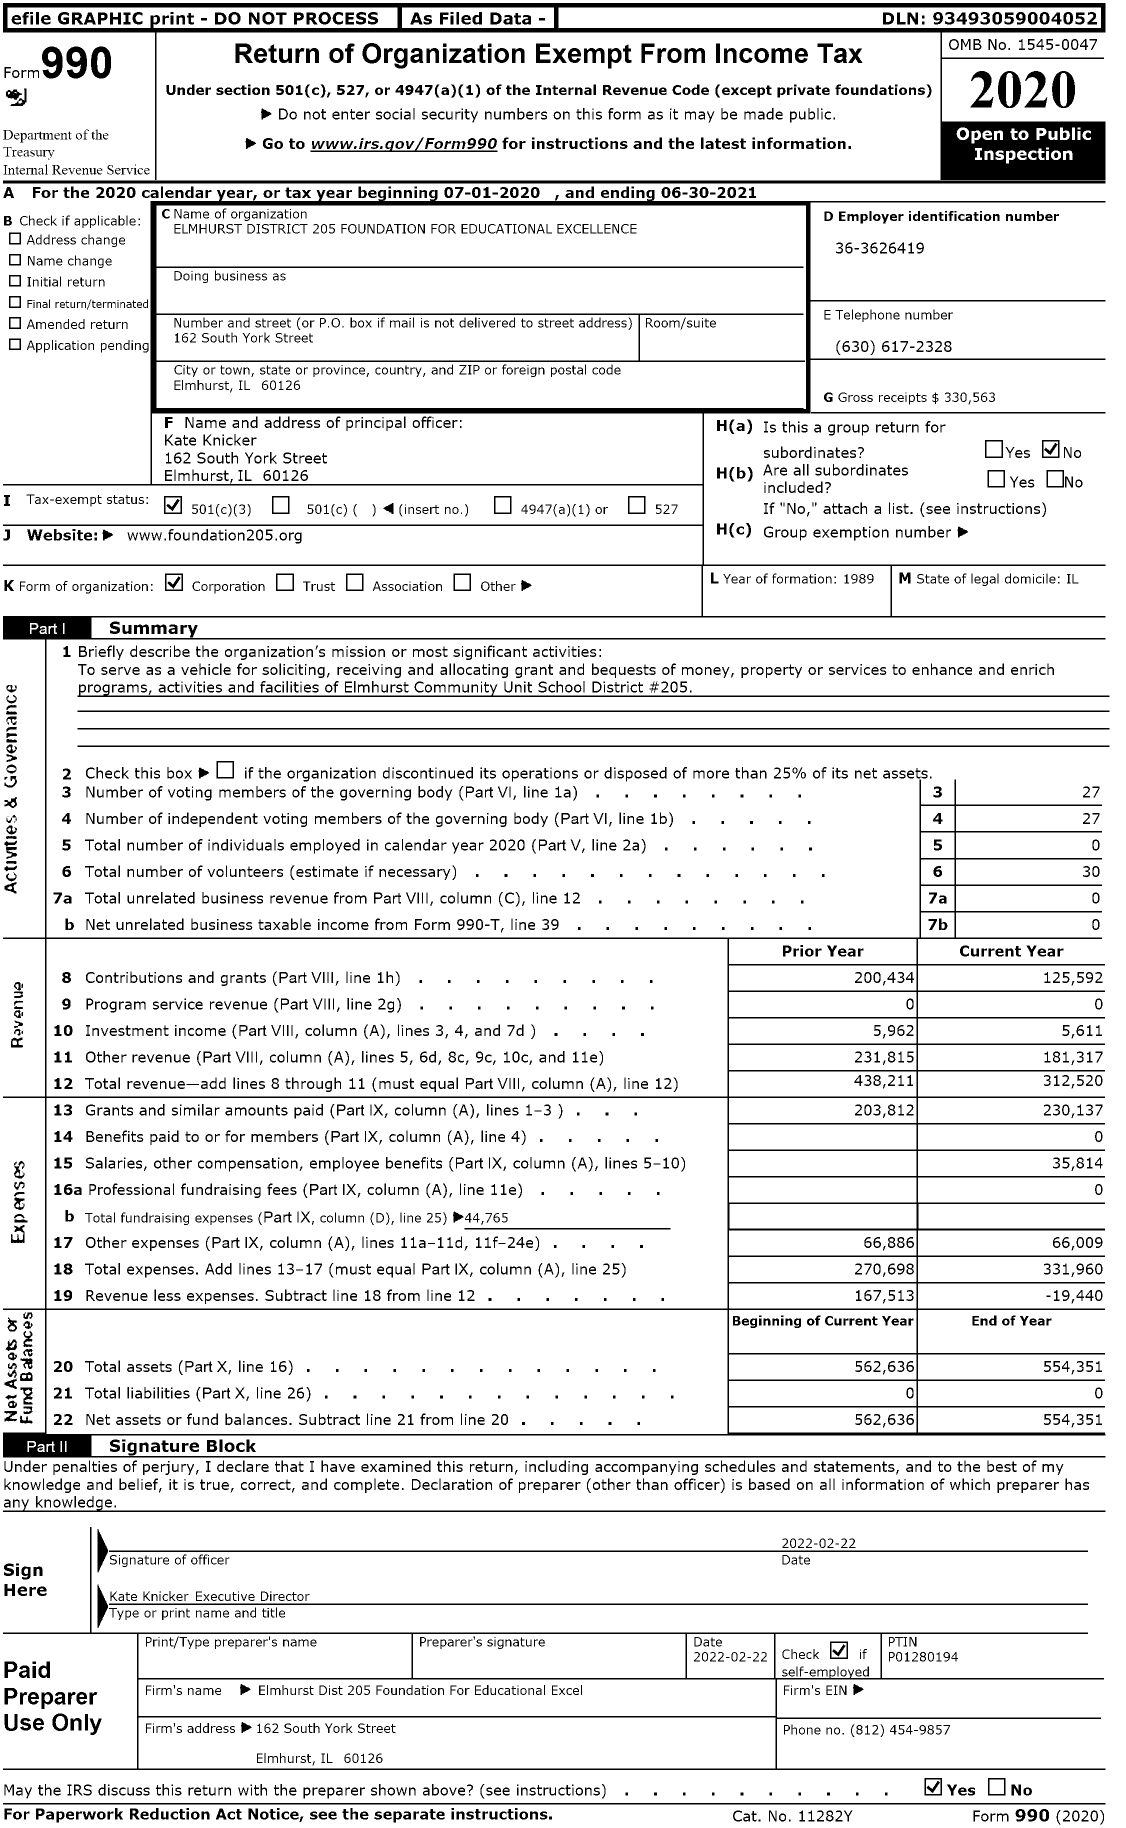 Image of first page of 2020 Form 990 for Elmhurst District 205 Foundation for Educational Excellence